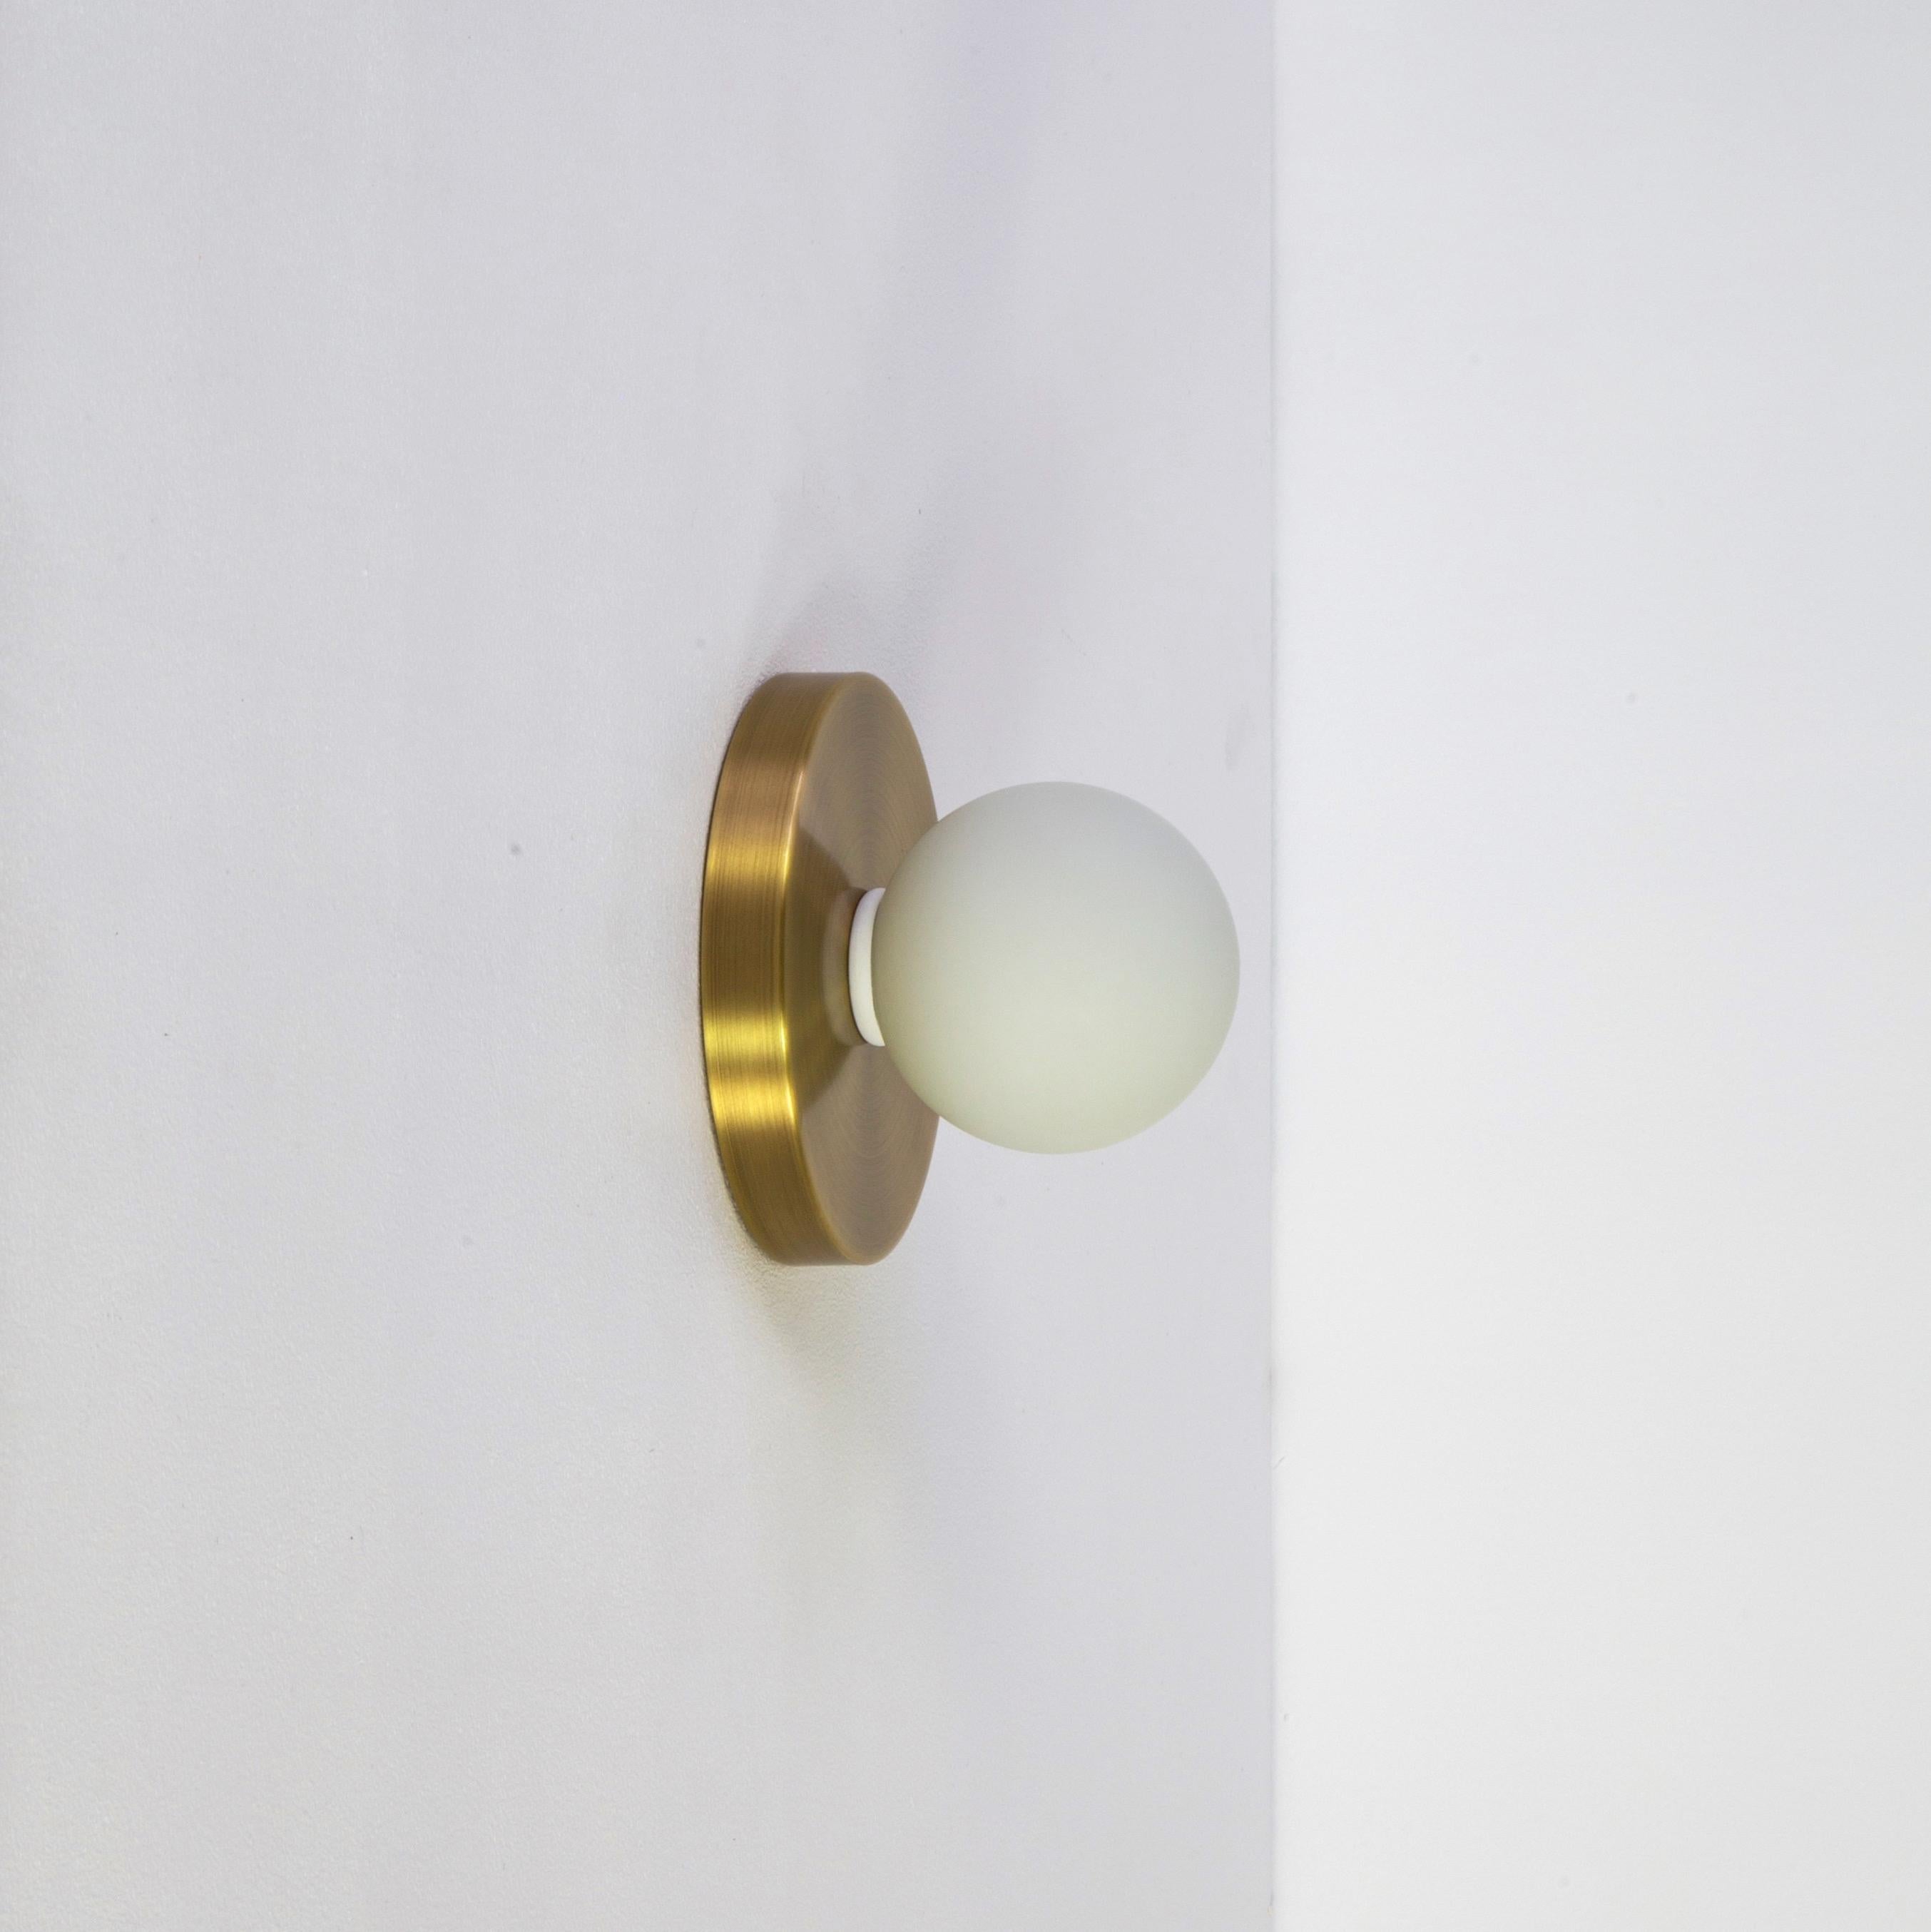 American Globe Sconce by Research.Lighting, Brushed Brass, Made to Order For Sale